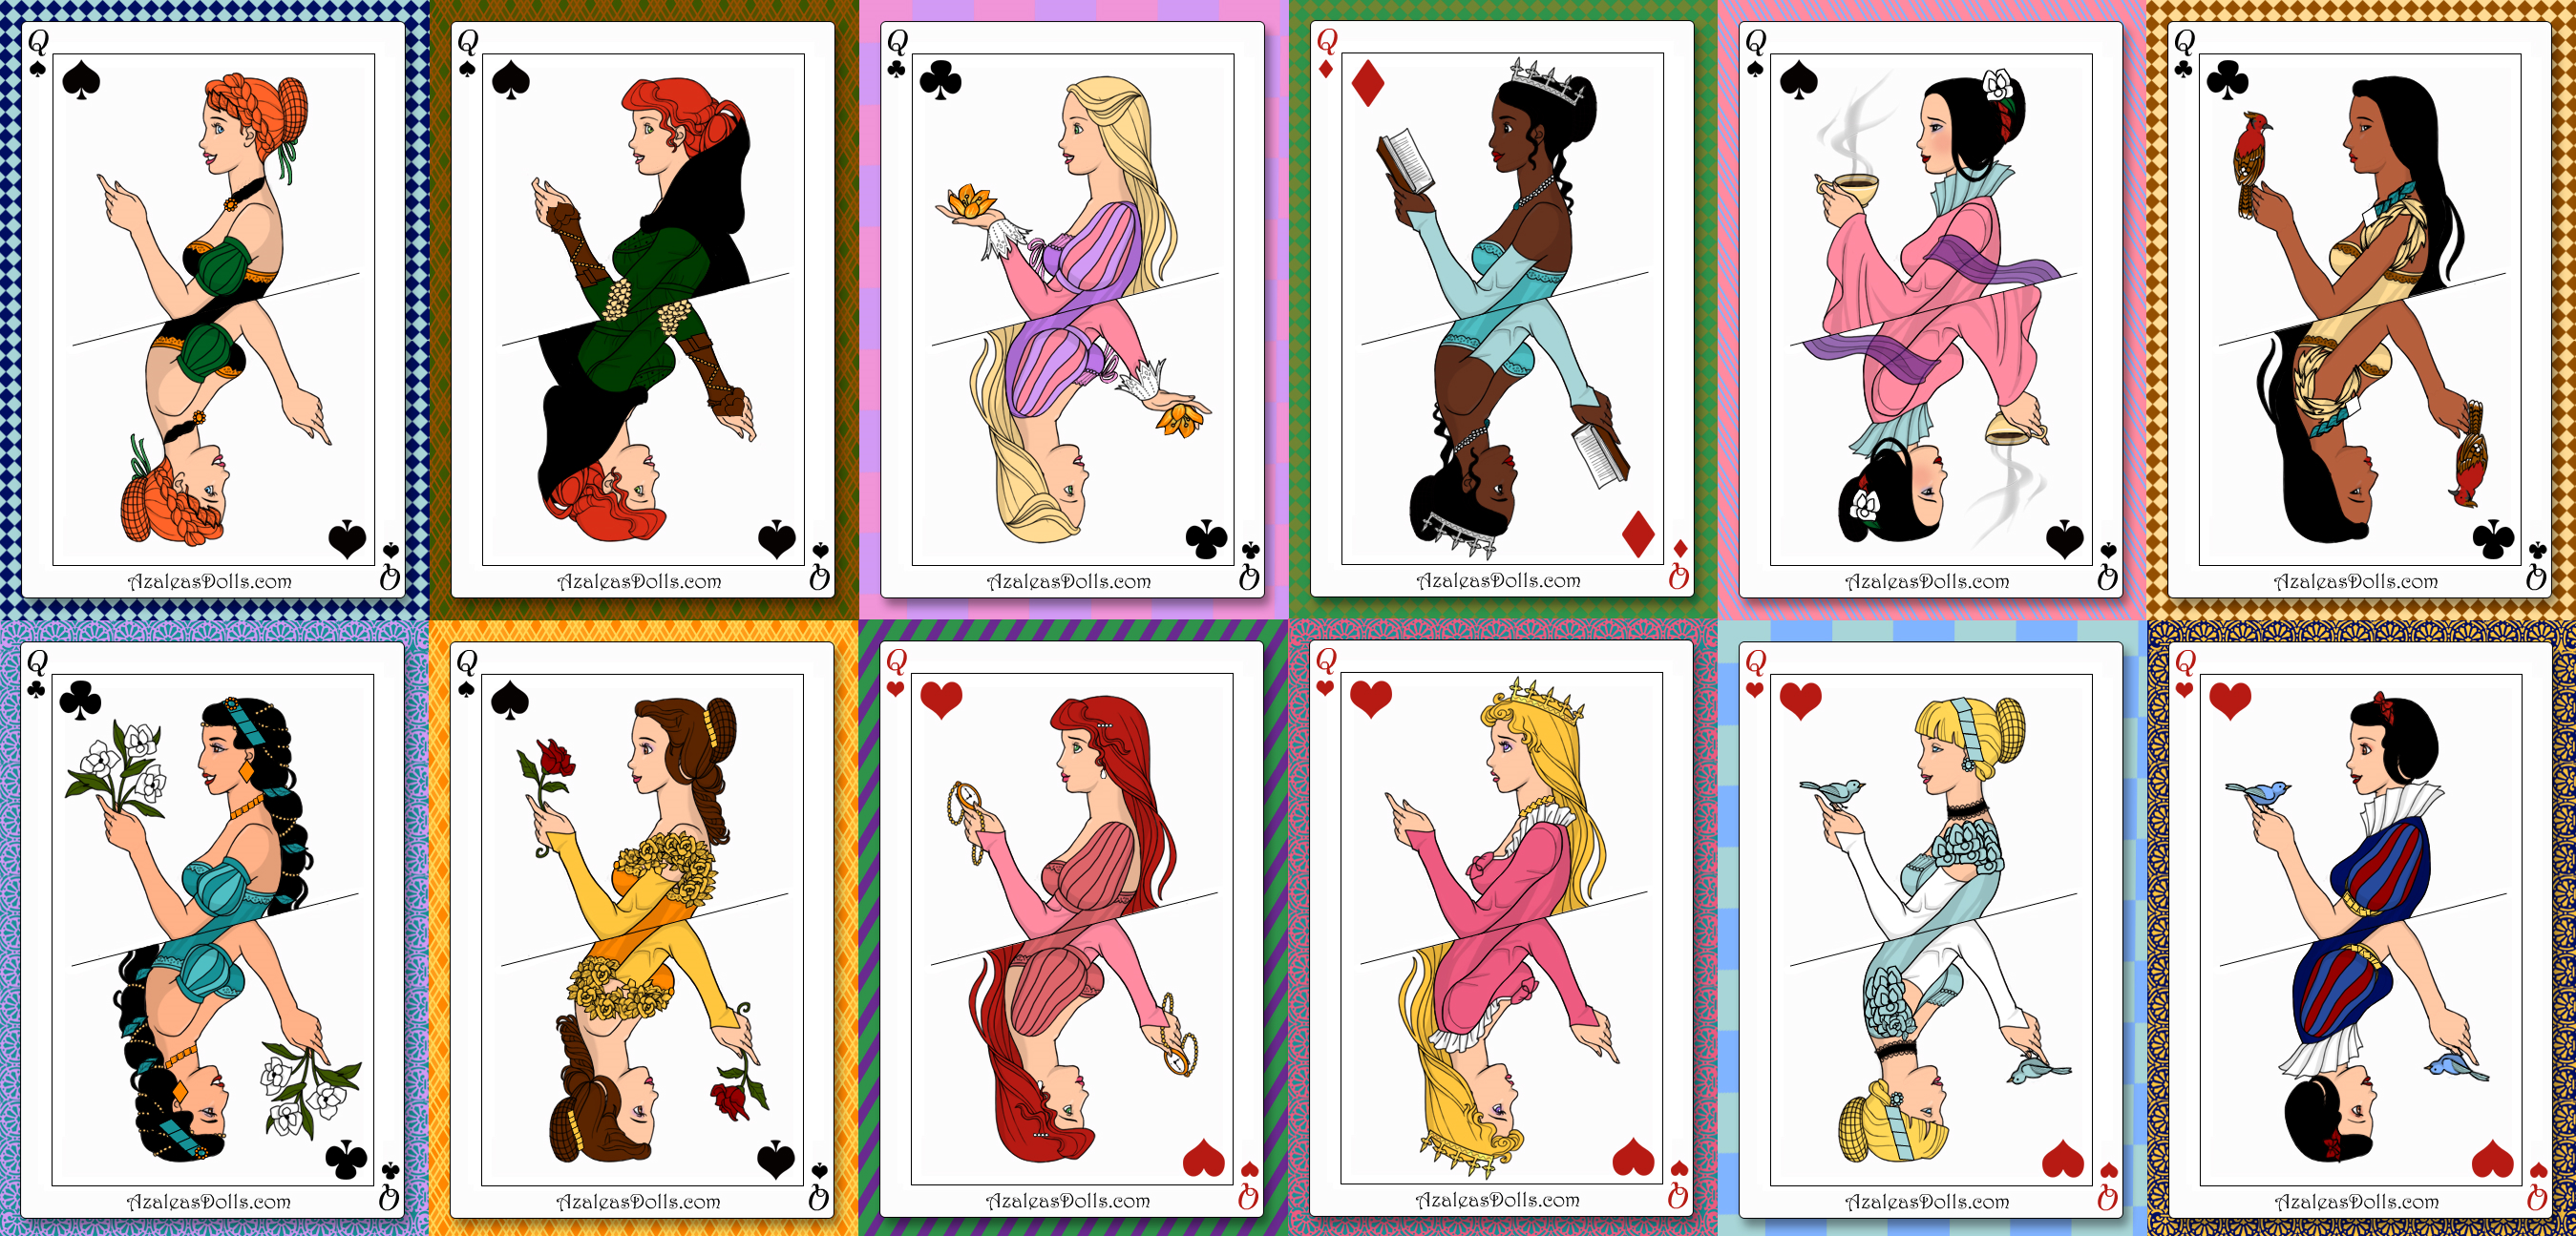 Disney Princesses Playing Cards by dcfan0590 on DeviantArt